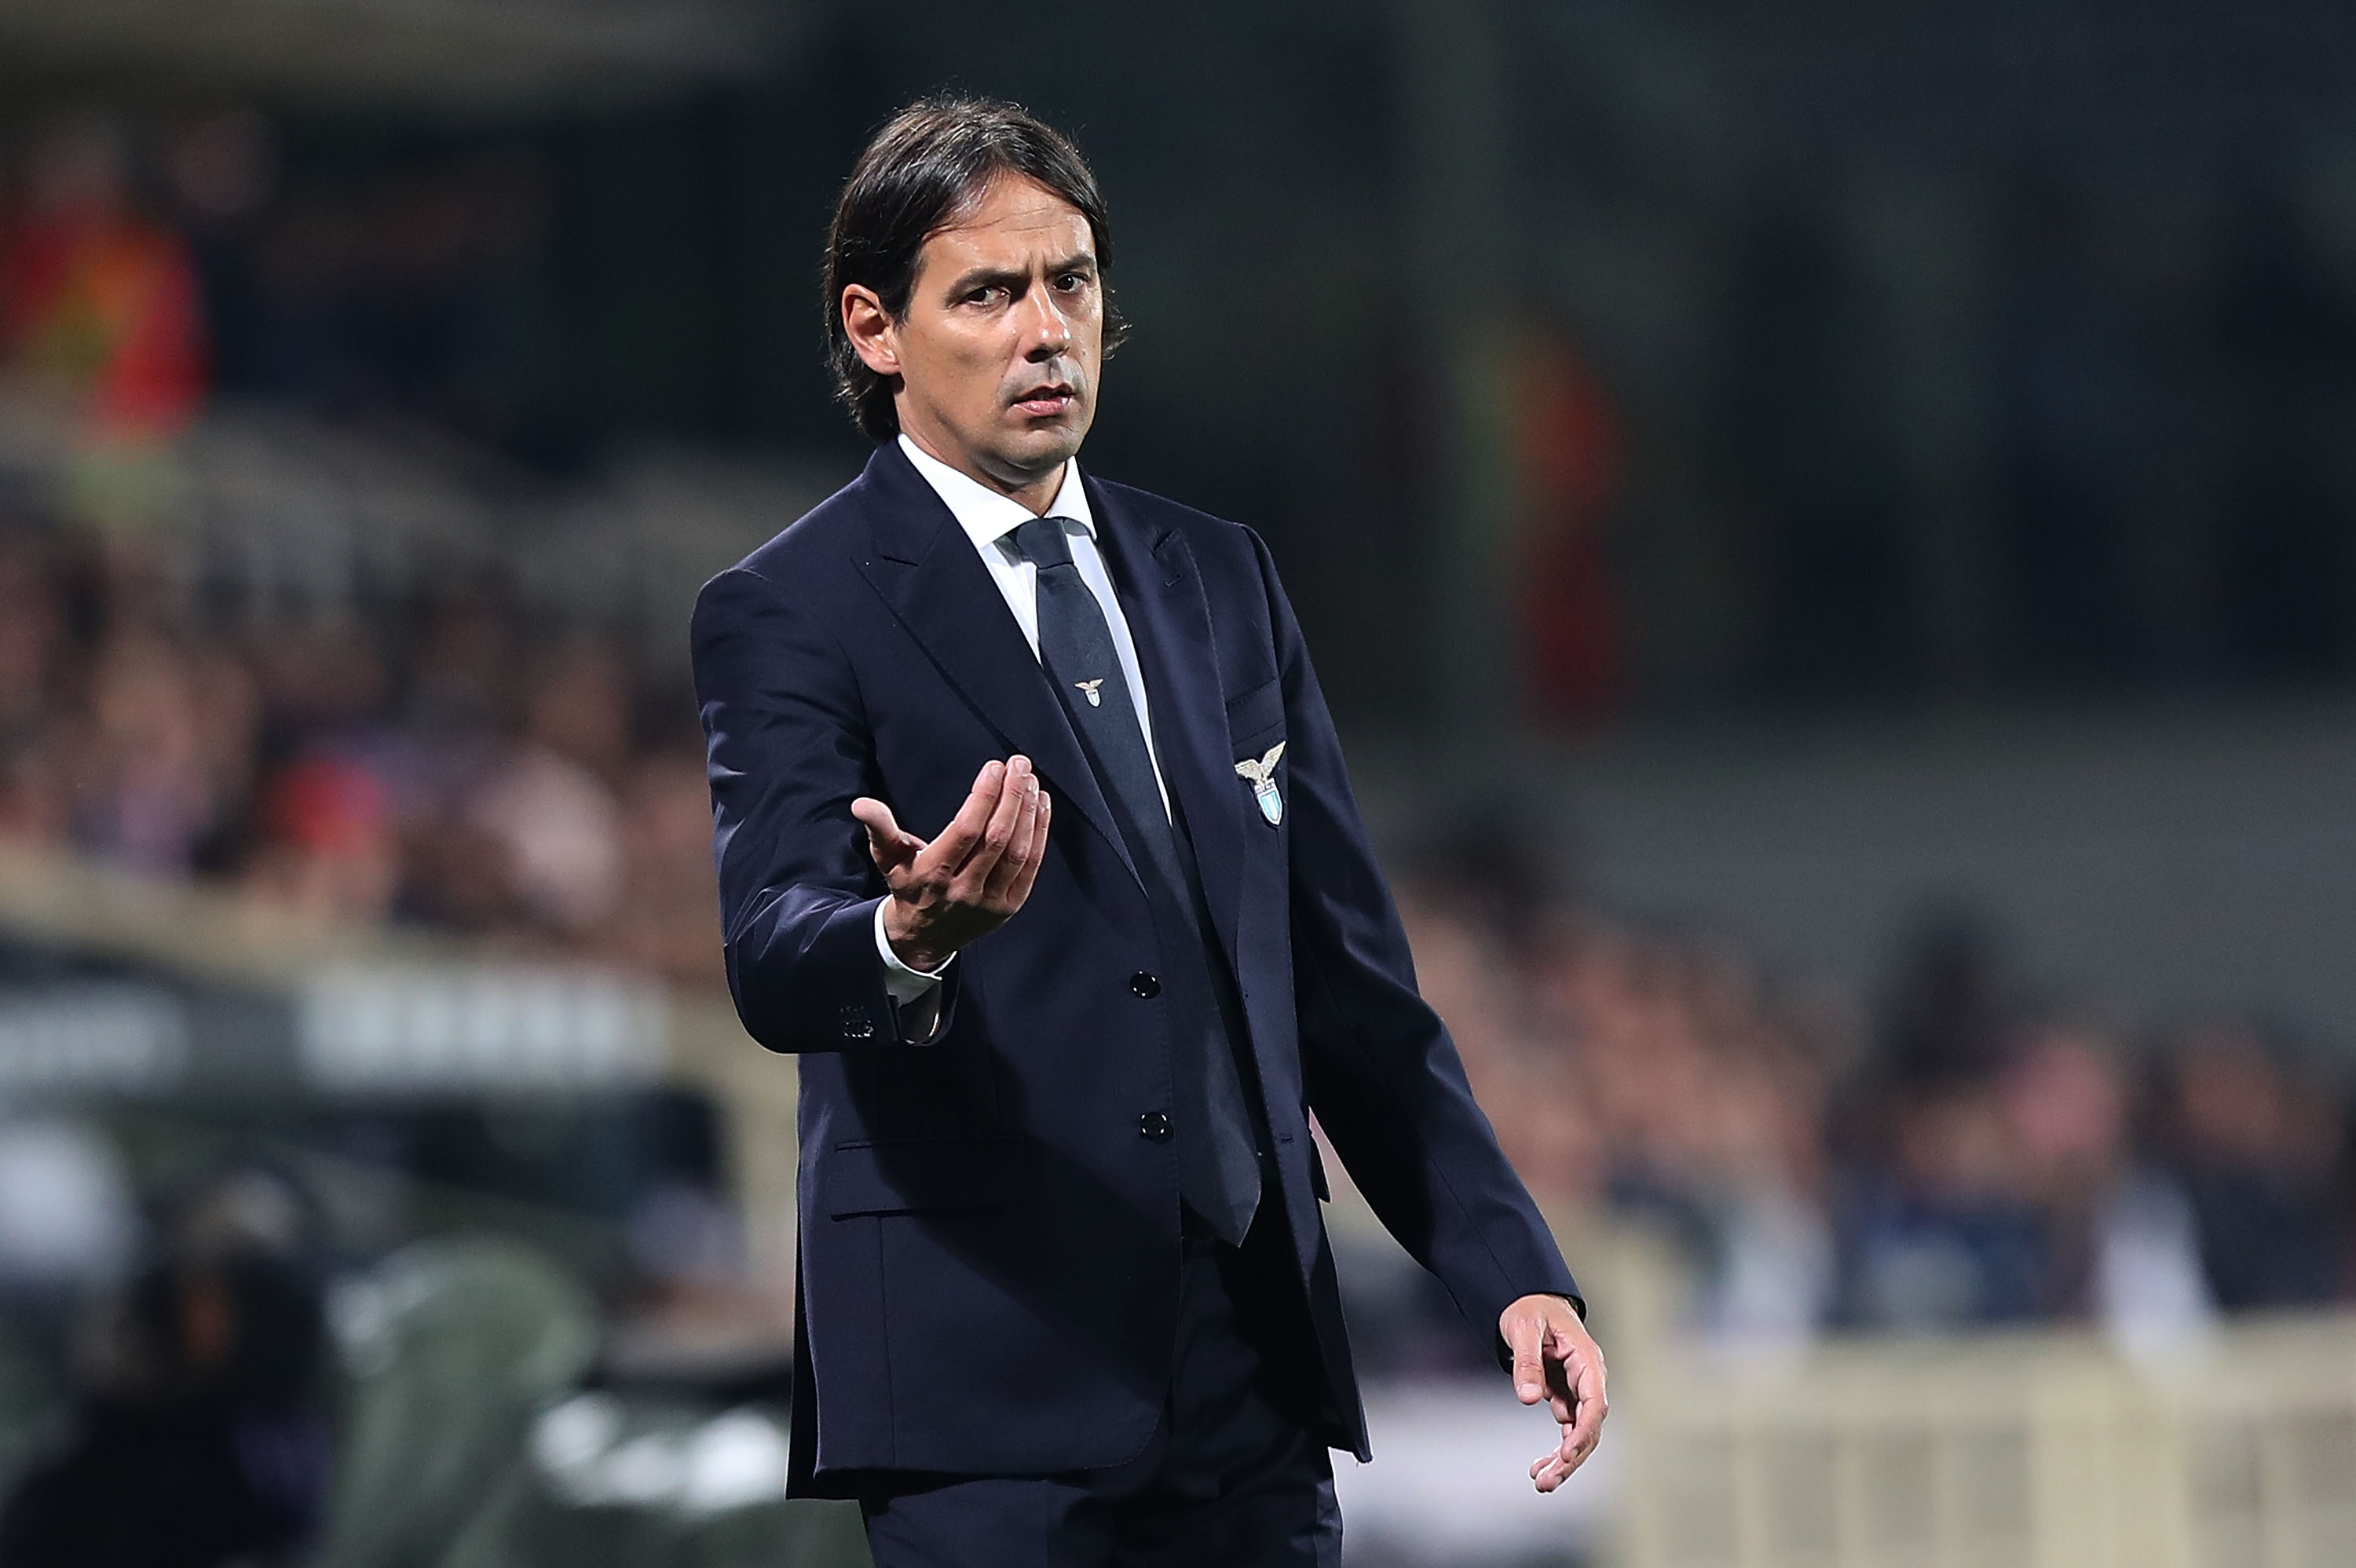 FLORENCE, ITALY - MARCH 10: Simone Inzaghi manager of SS Lazio gestures during the Serie A match between ACF Fiorentina and SS Lazio at Stadio Artemio Franchi on March 10, 2019 in Florence, Italy.  (Photo by Gabriele Maltinti/Getty Images)